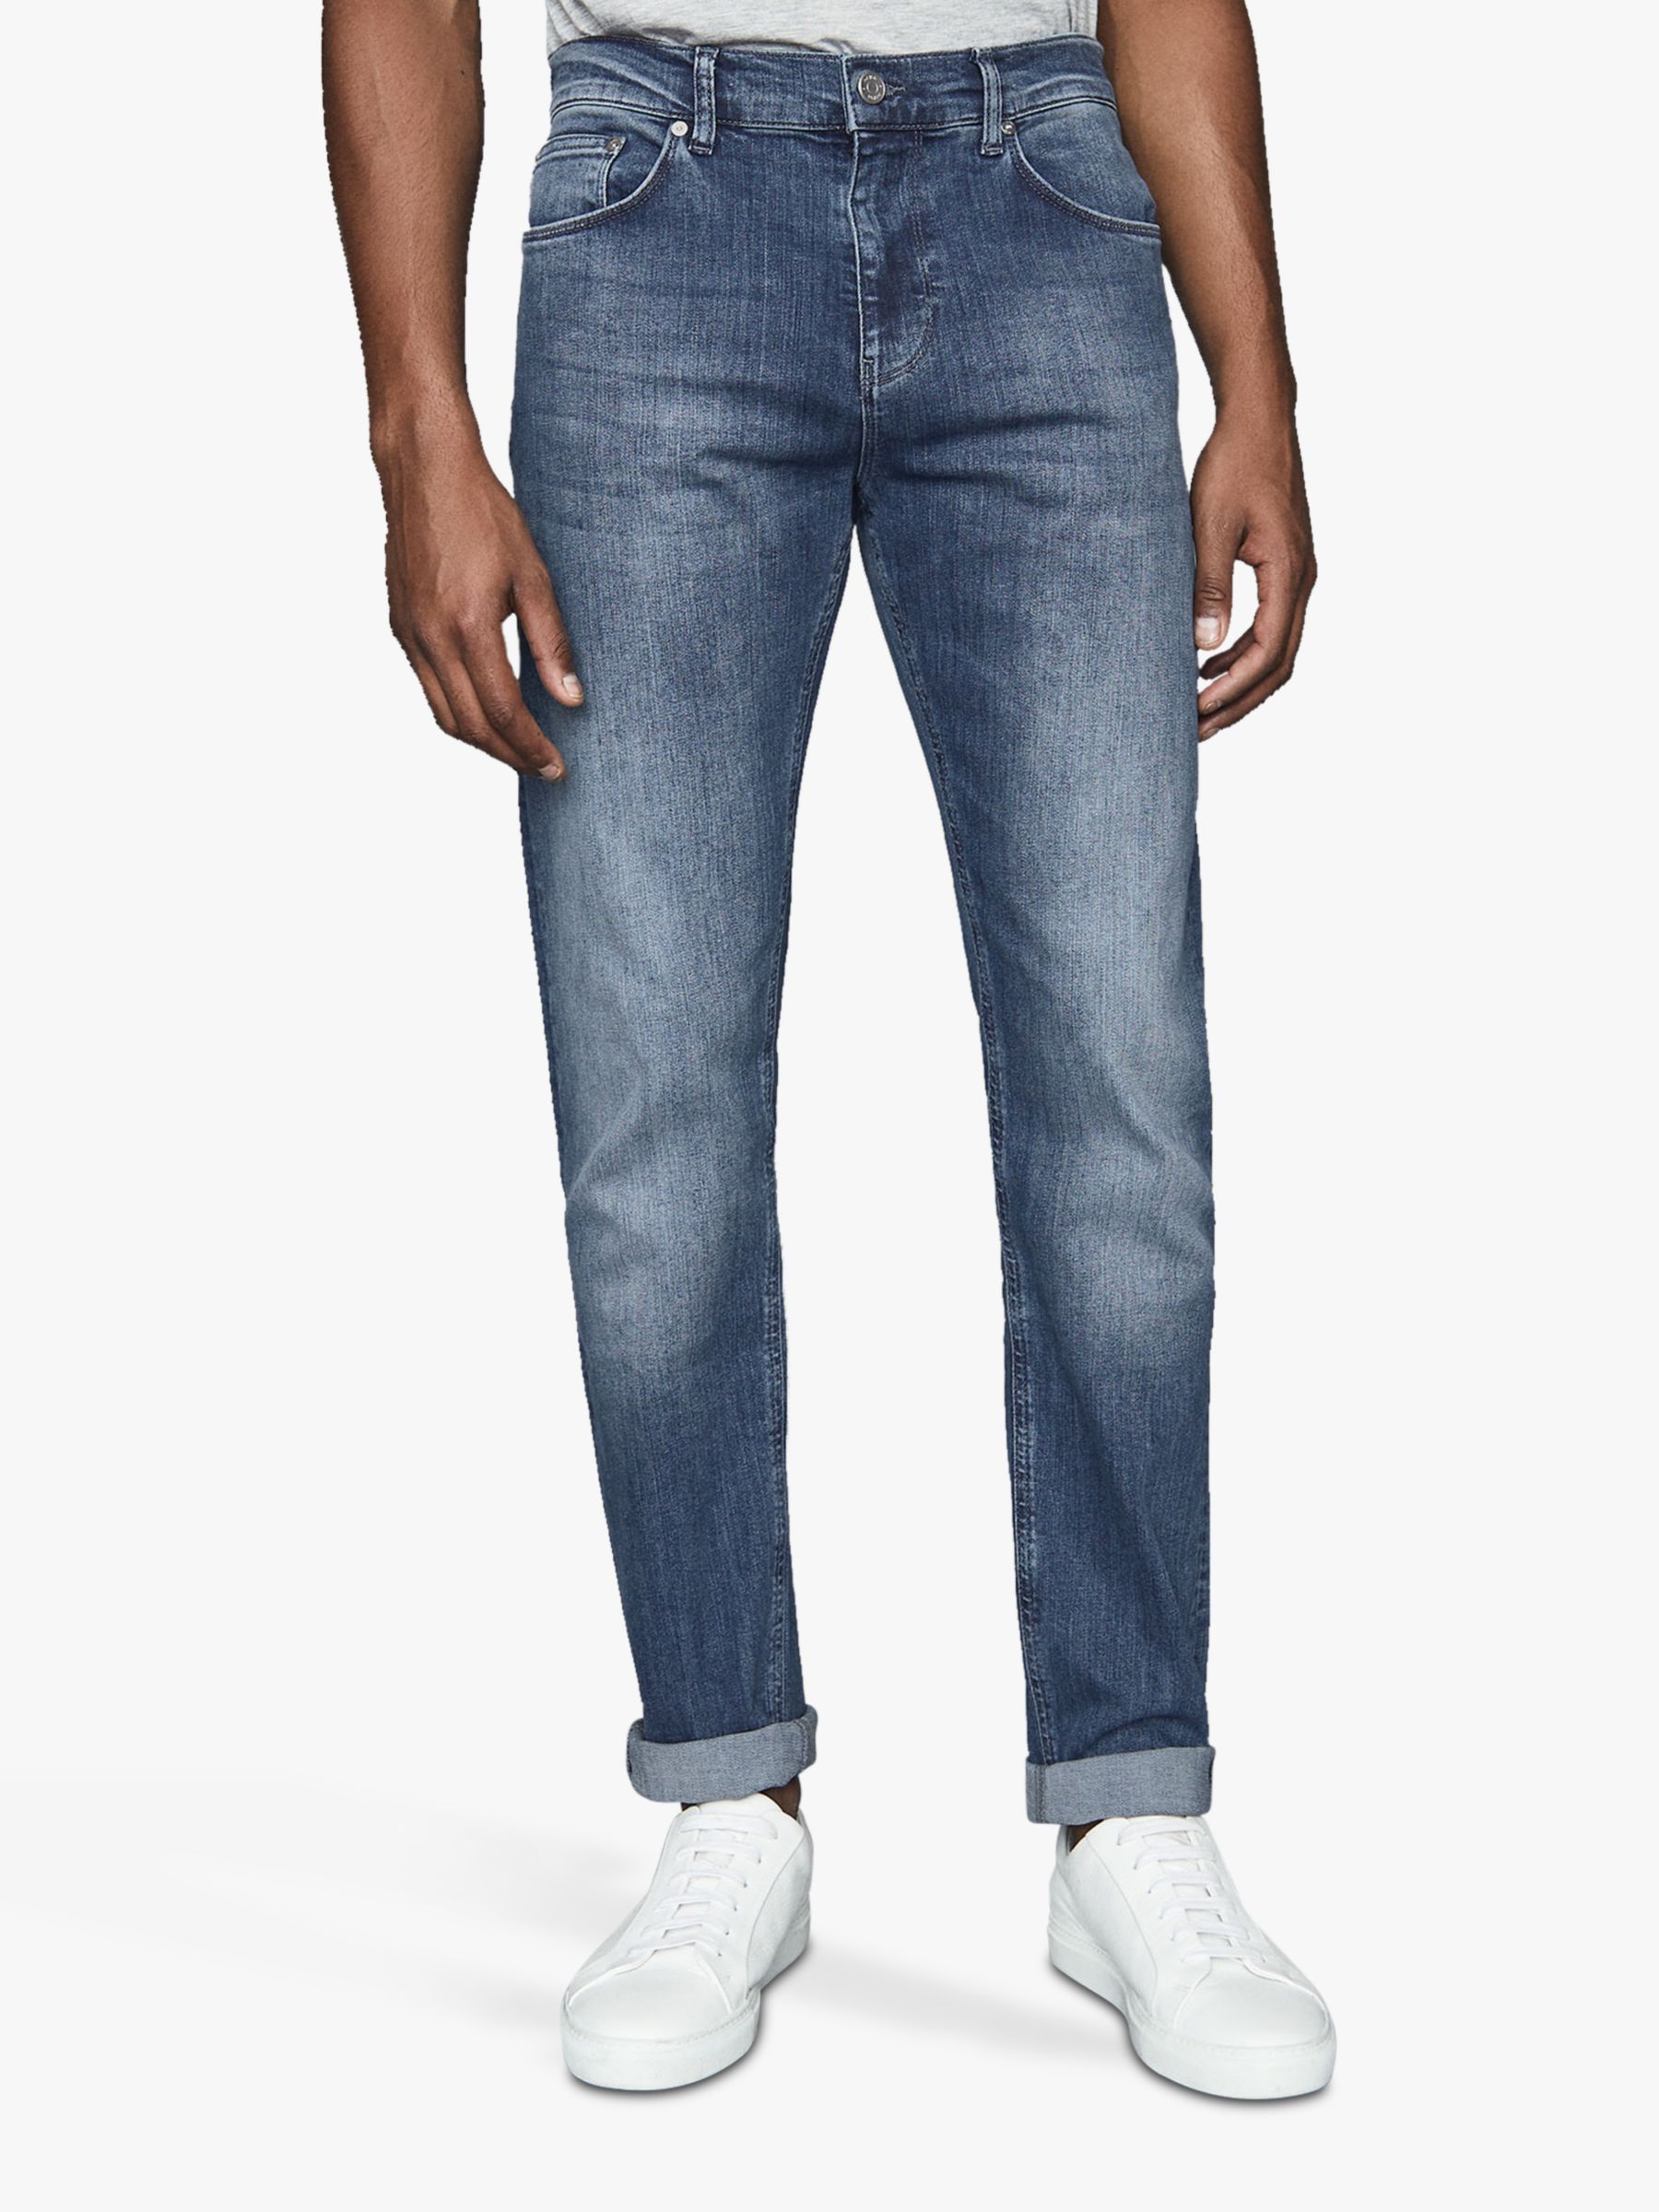 Reiss Pride Washed Slim Fit Jeans, Airforce Blue